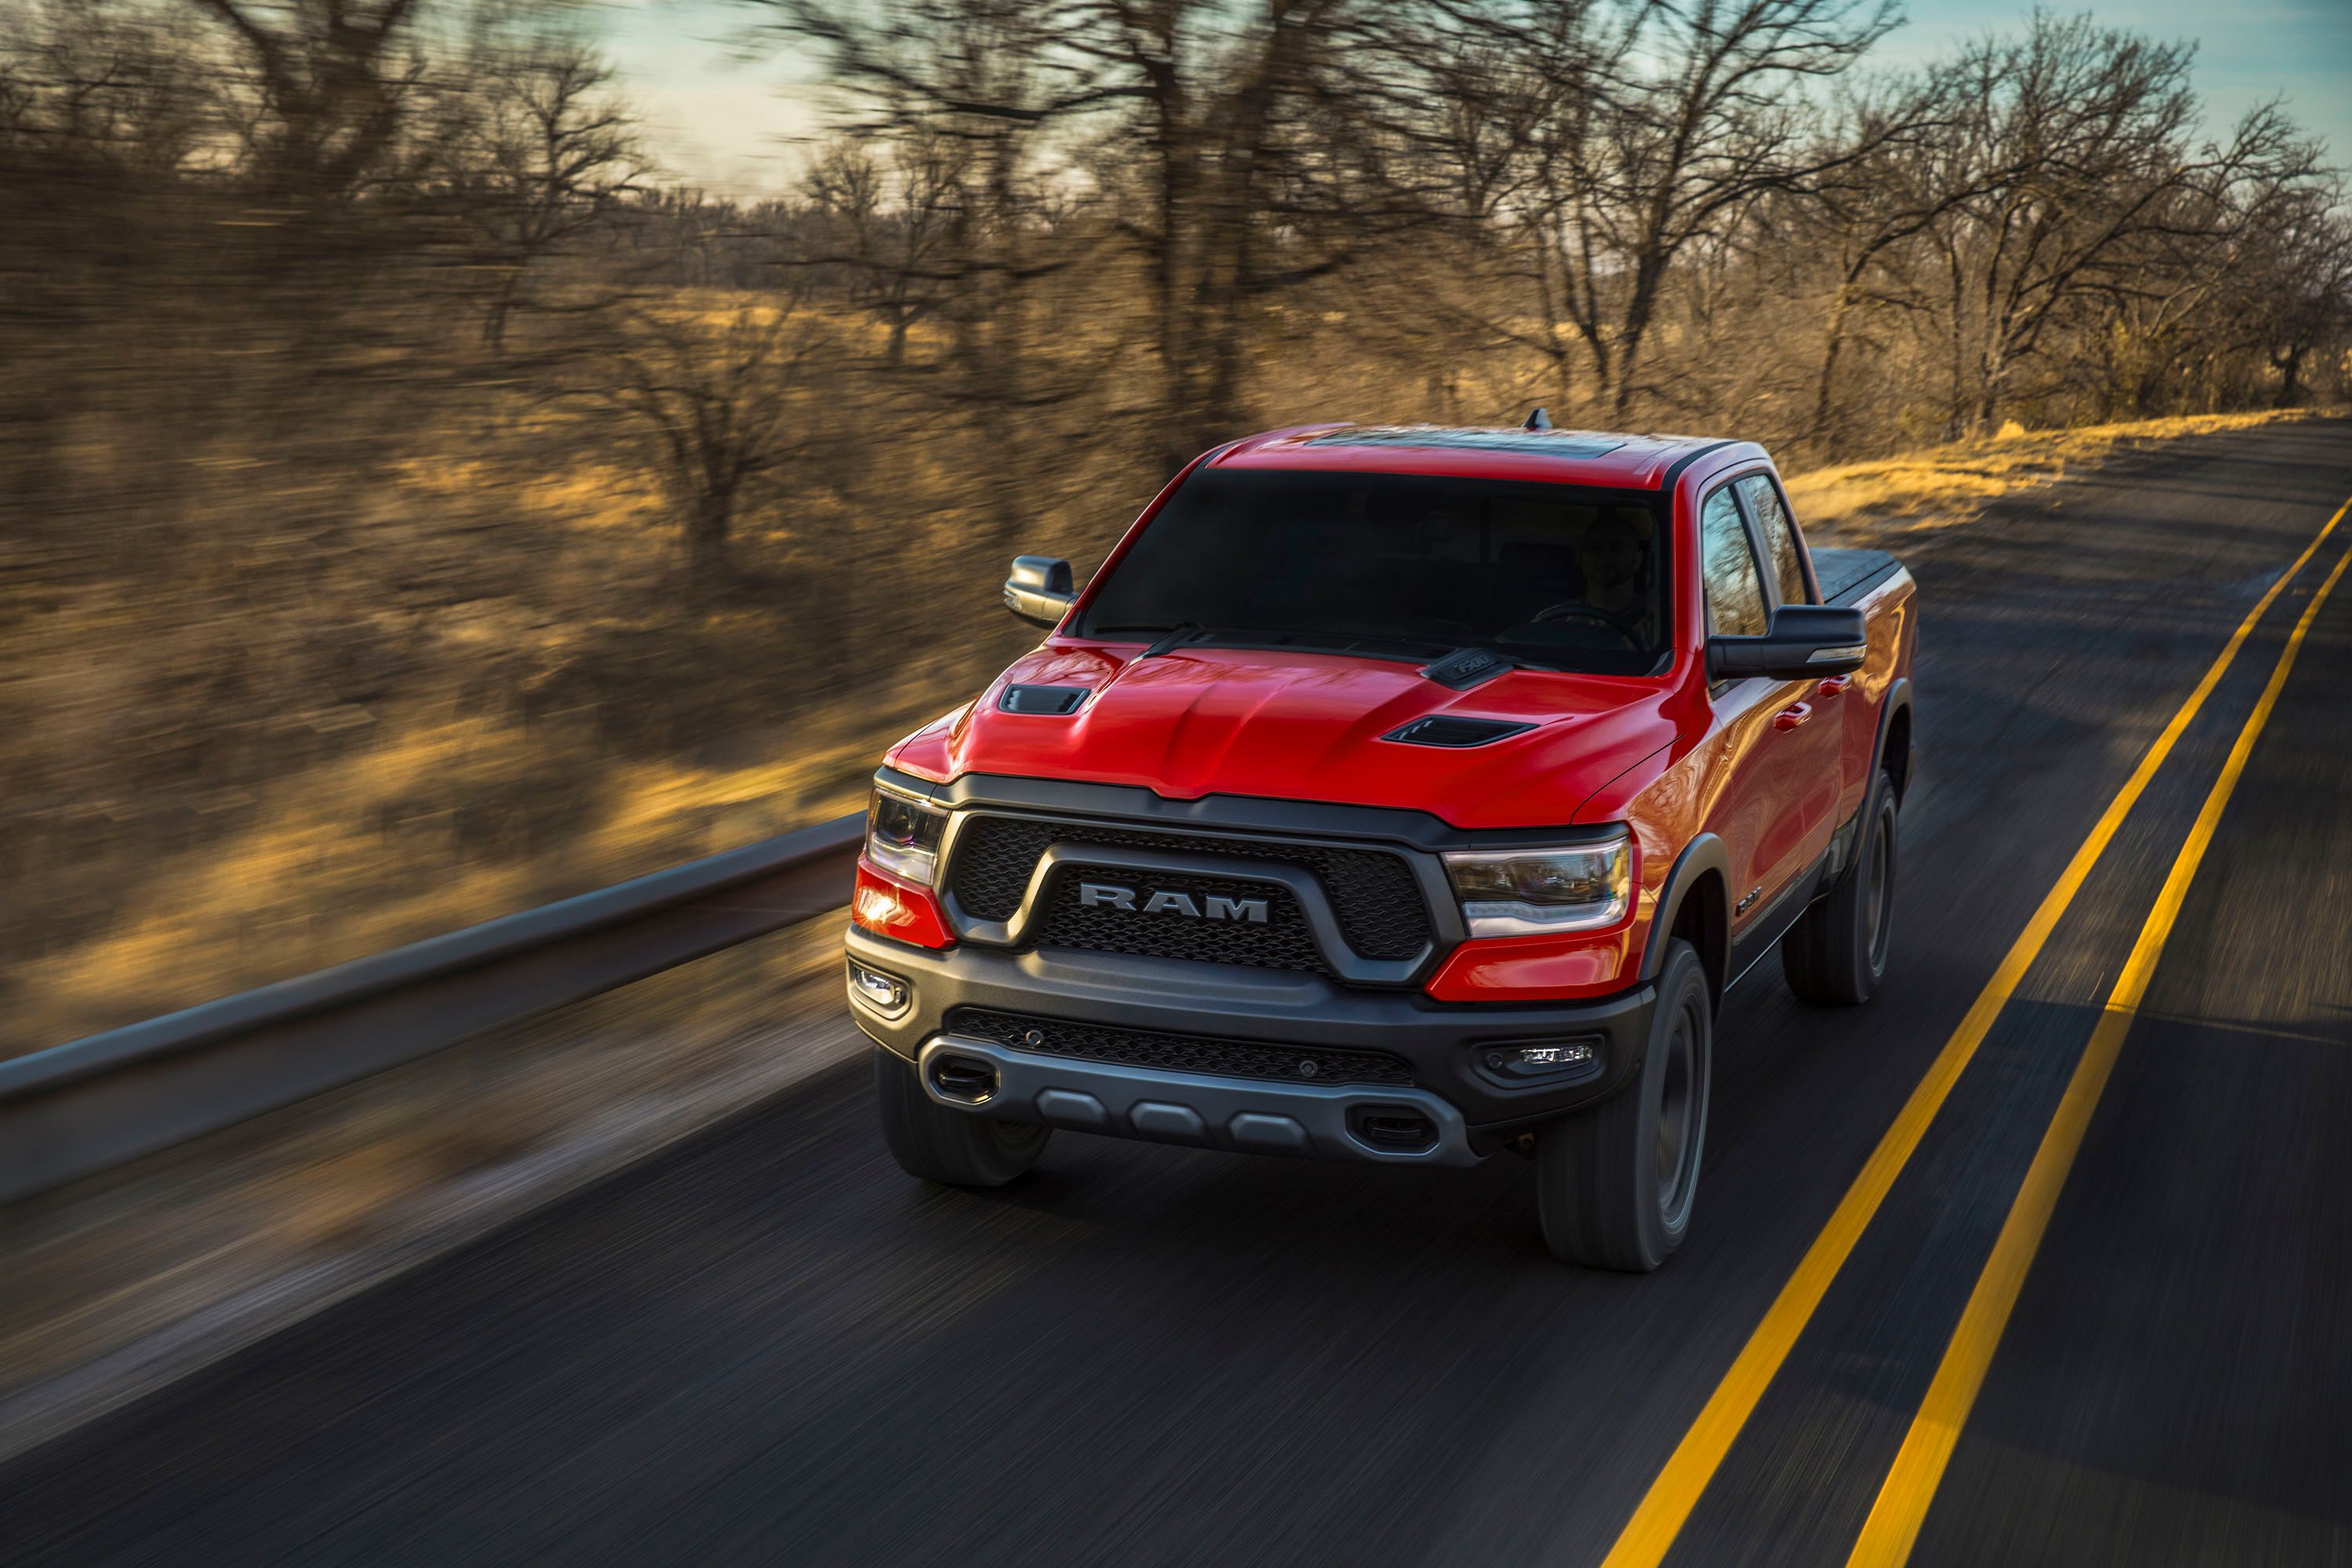 2021 Ram Trucks Not A Part Of The Newly-Formed Stellantis Group Anymore